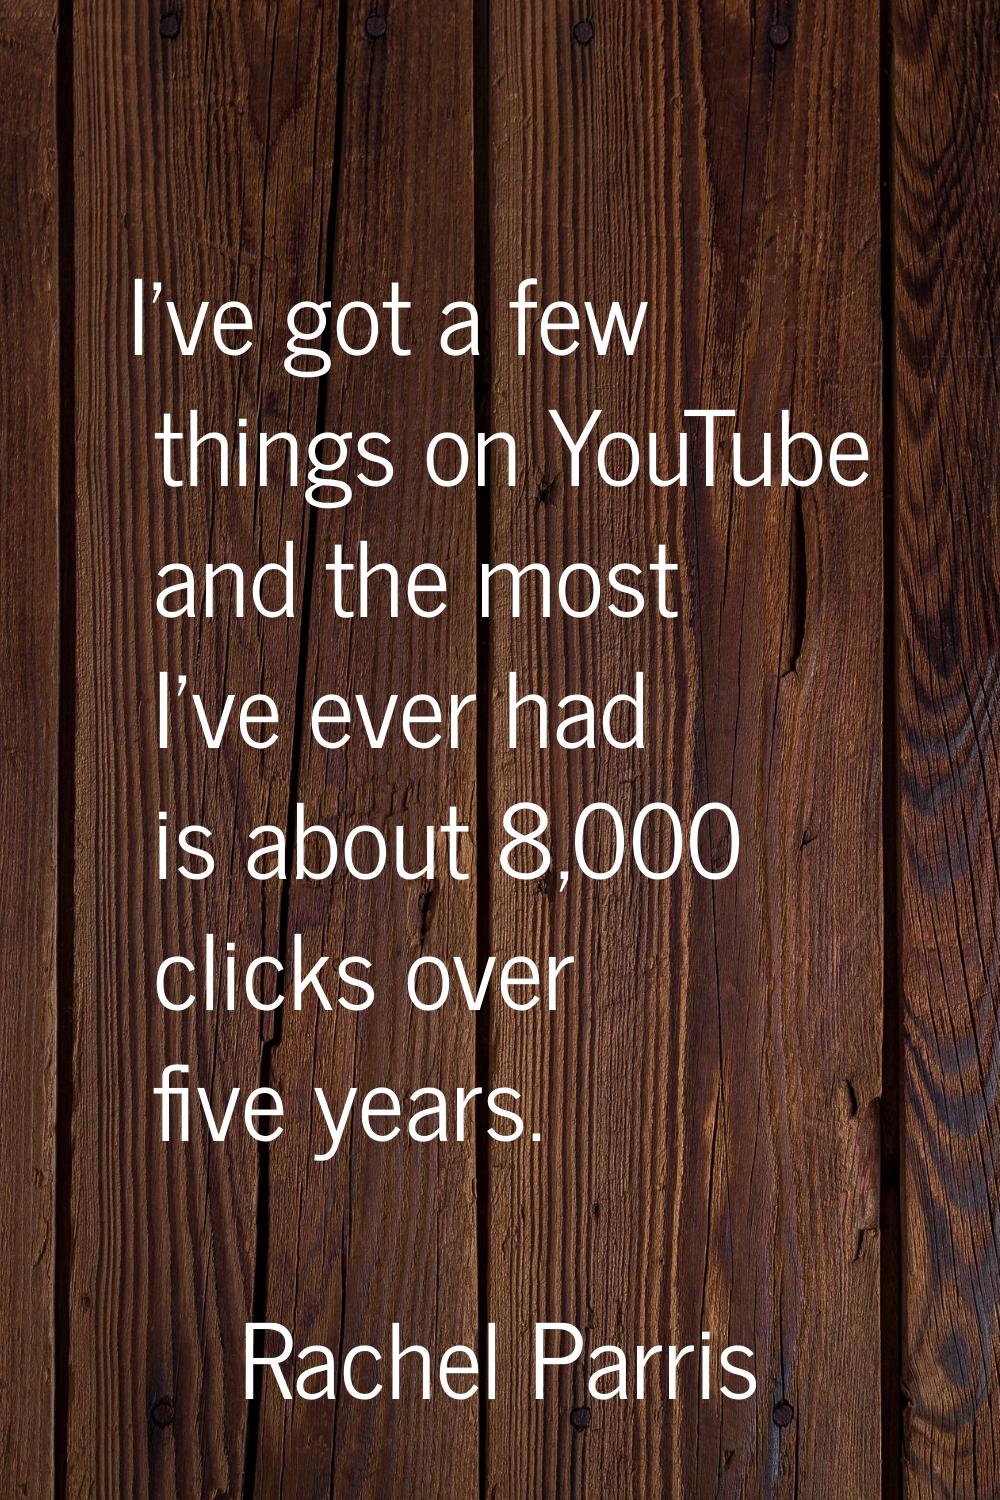 I’ve got a few things on YouTube and the most I’ve ever had is about 8,000 clicks over five years.